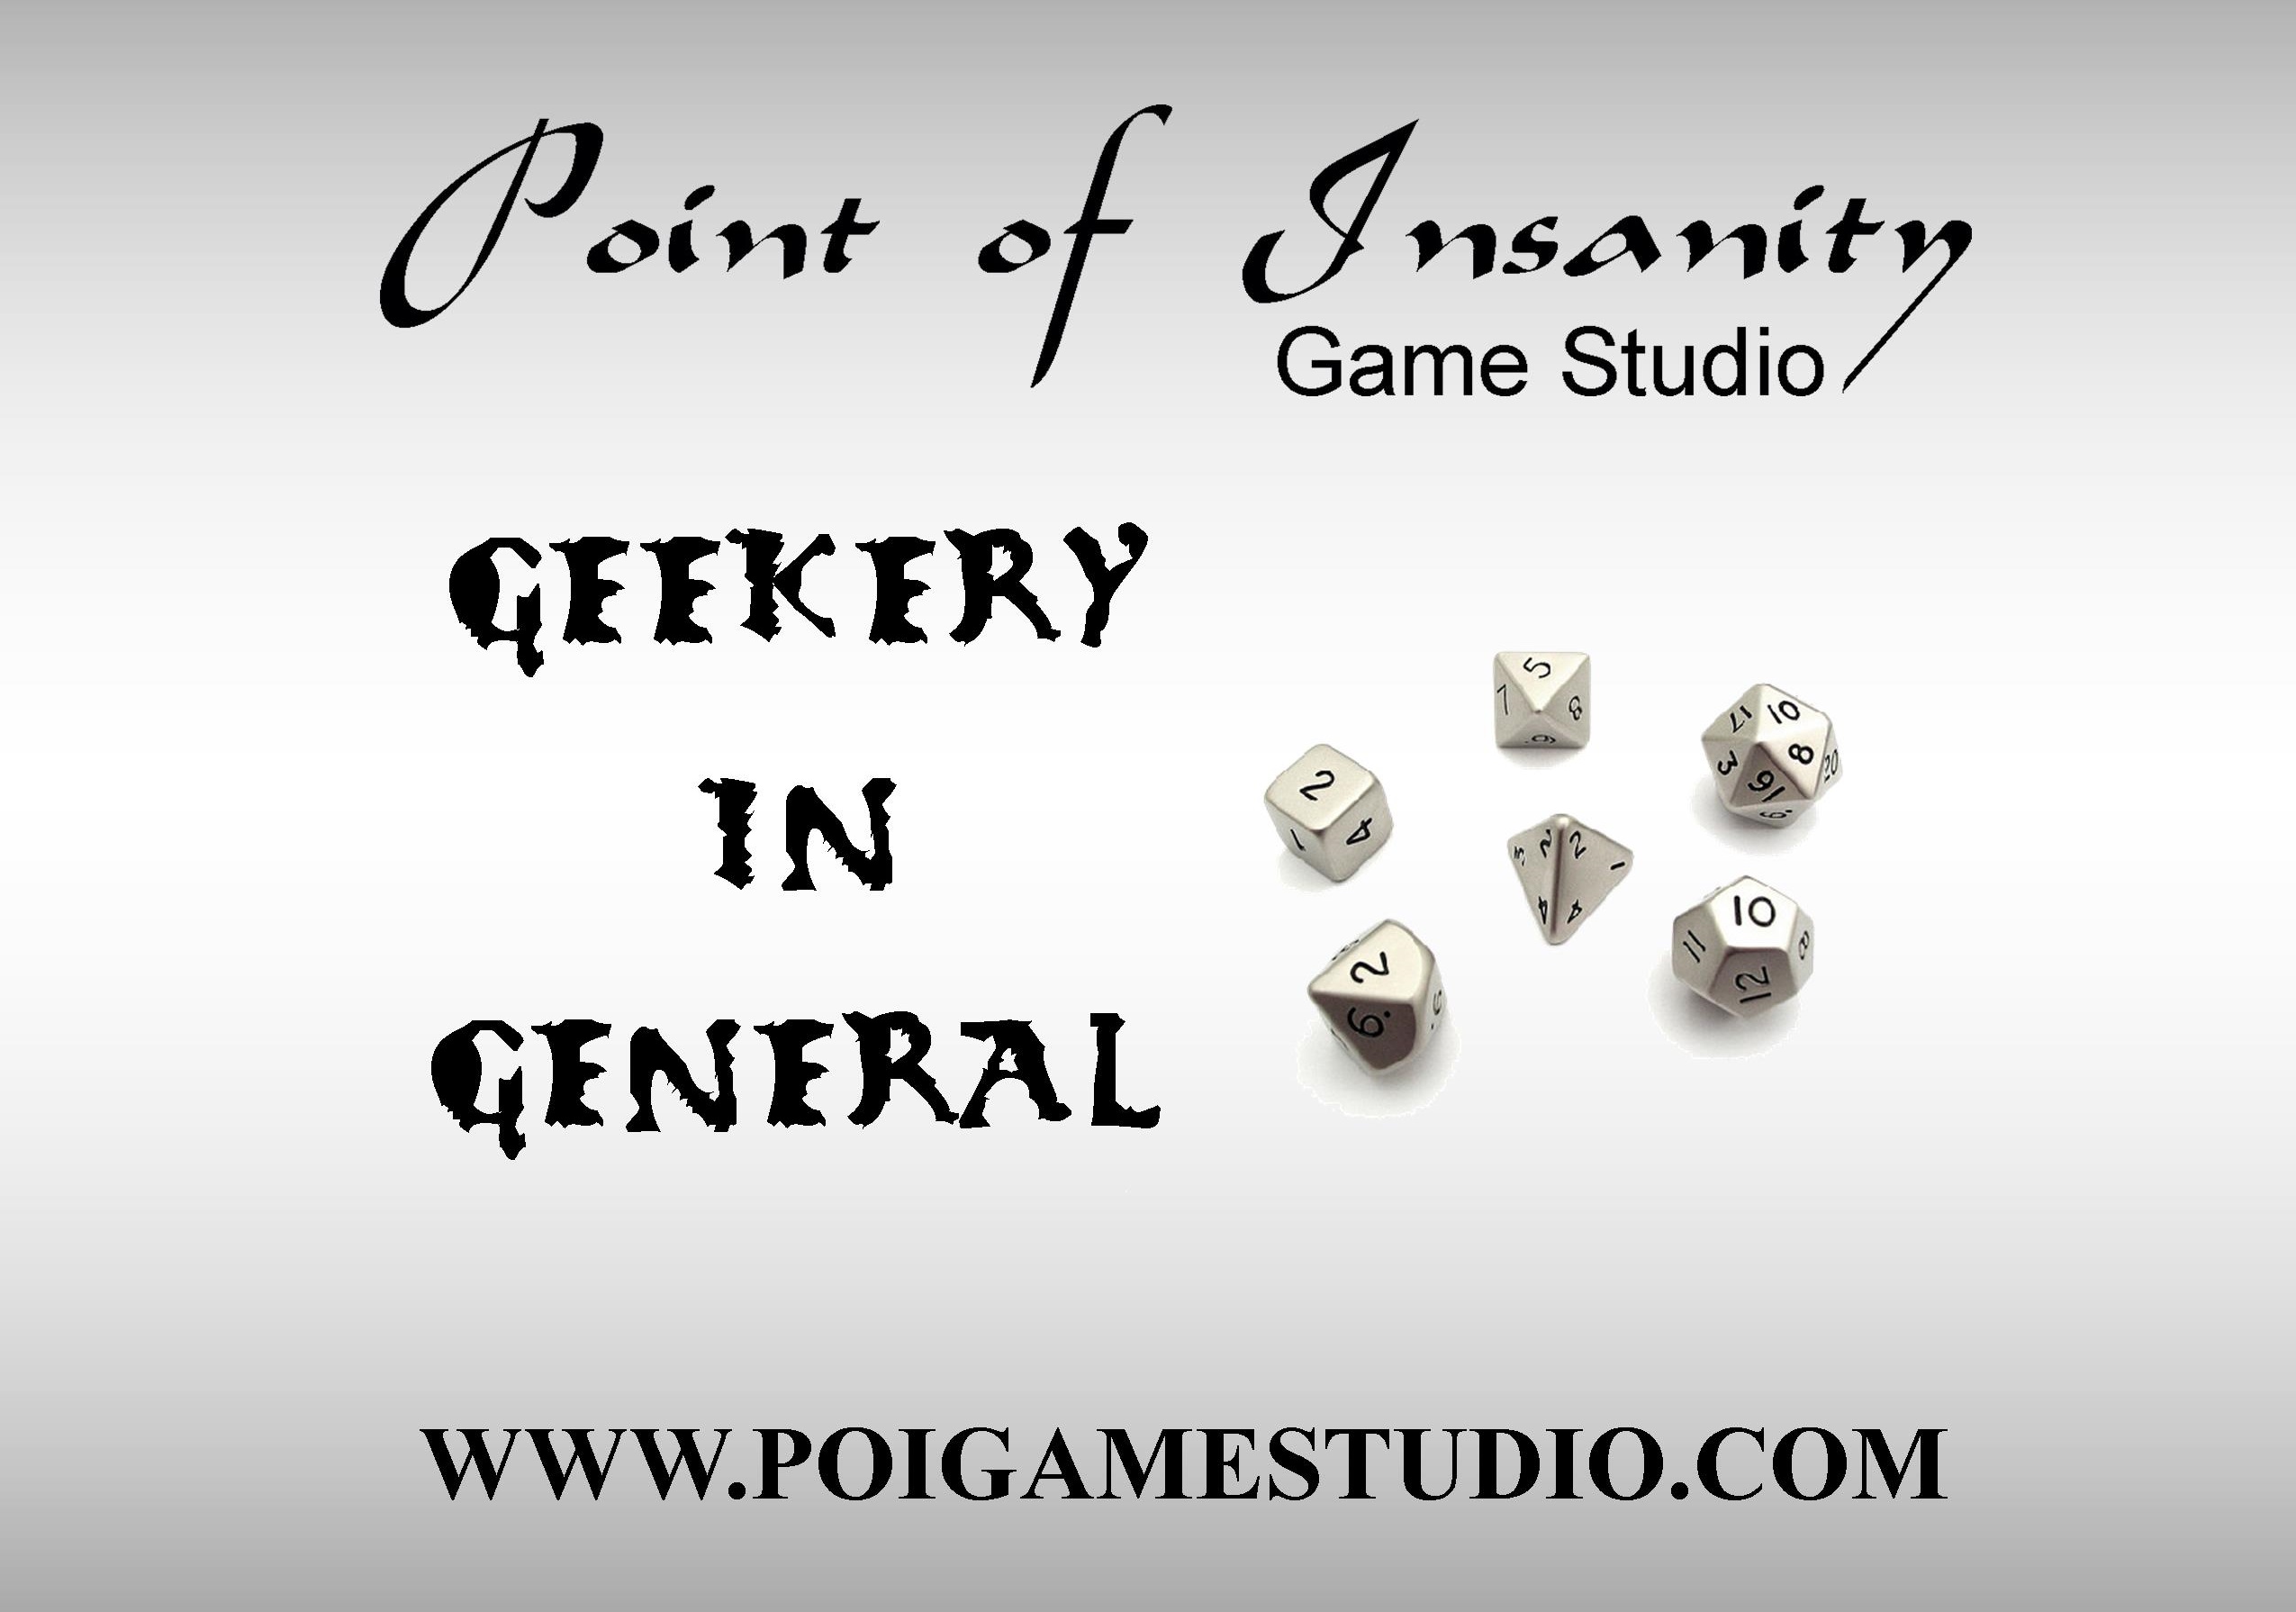 Geekery in General 168: Tall Tales of the Wee Folk